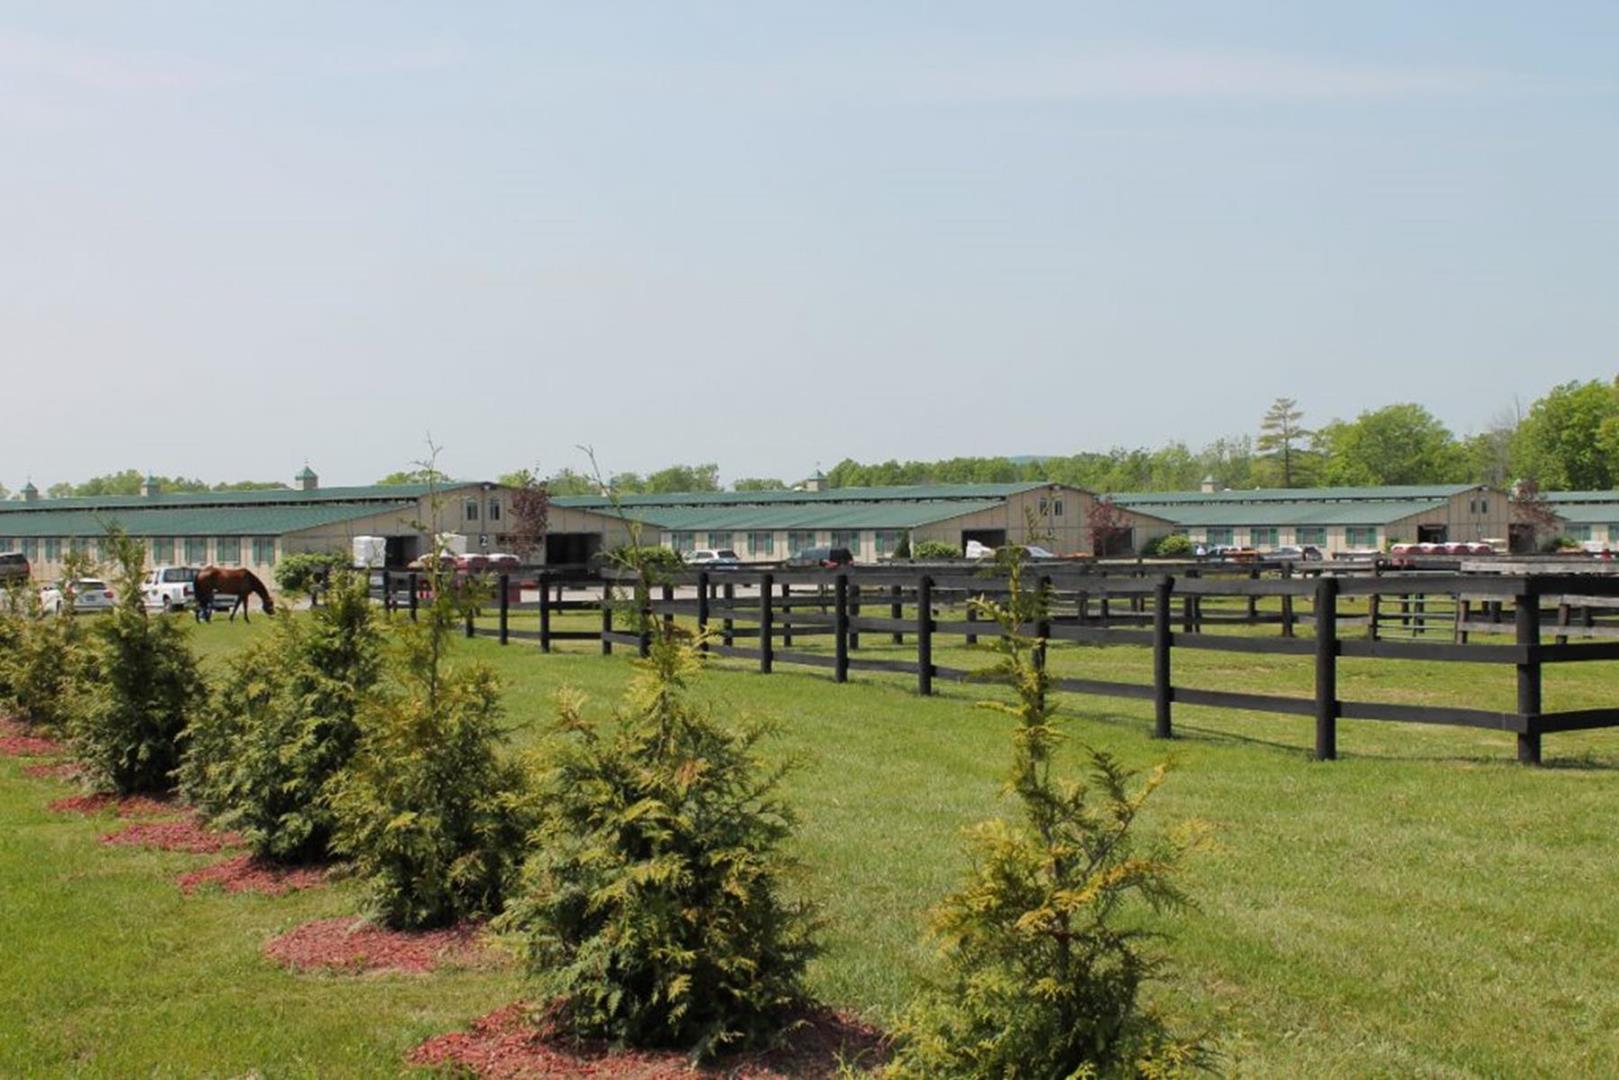 HITS-on-the-Hudson equestrian venue